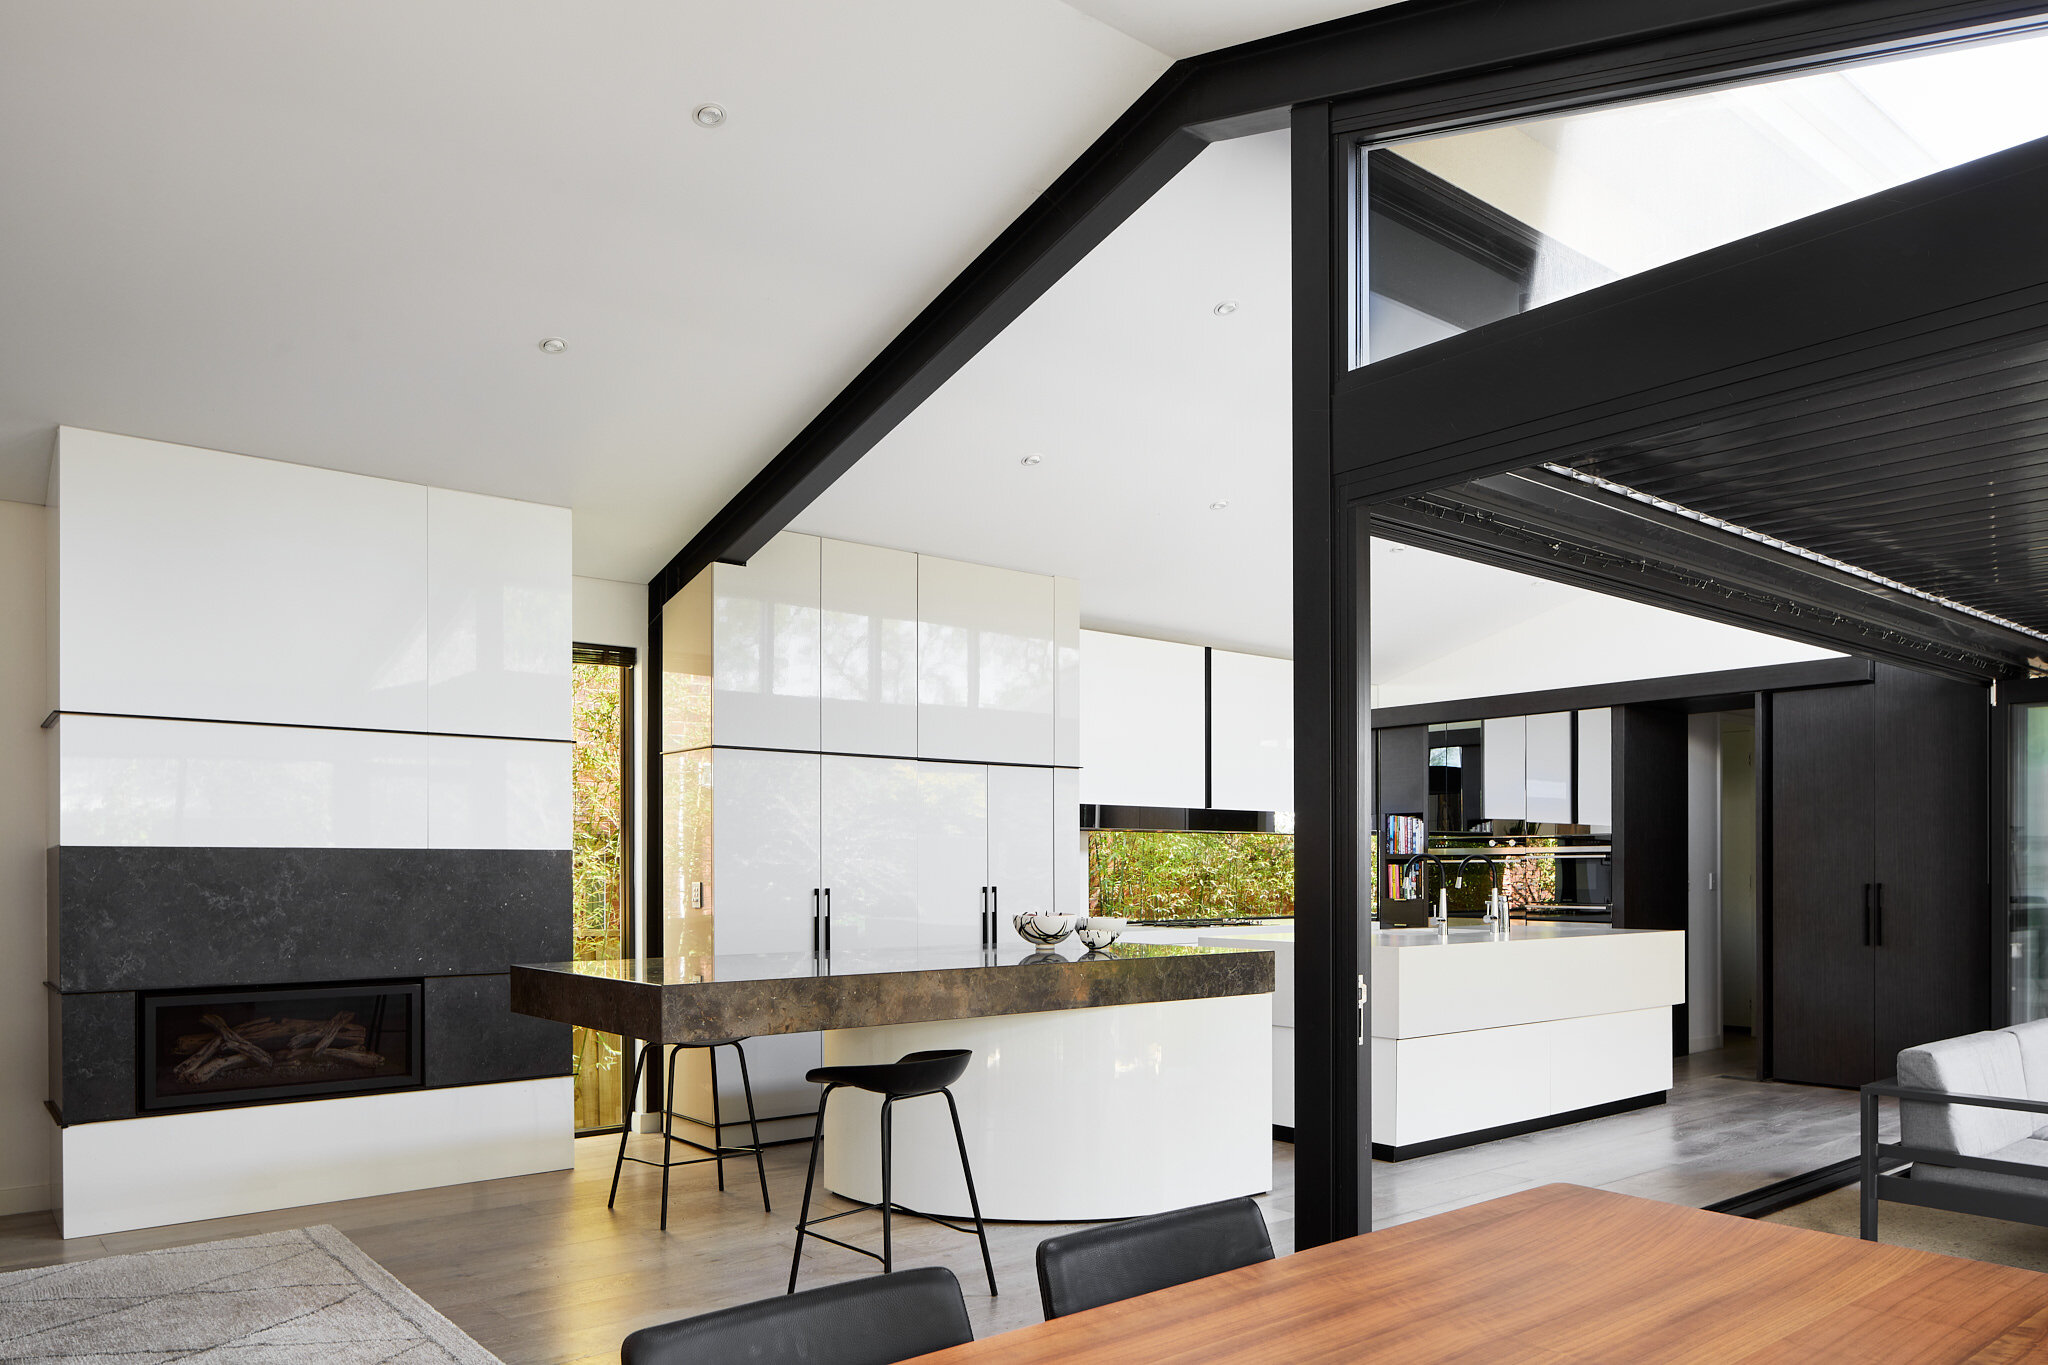 Black and white kitchen raked ceilings Adyn Kelly Spreading Roomers.jpg